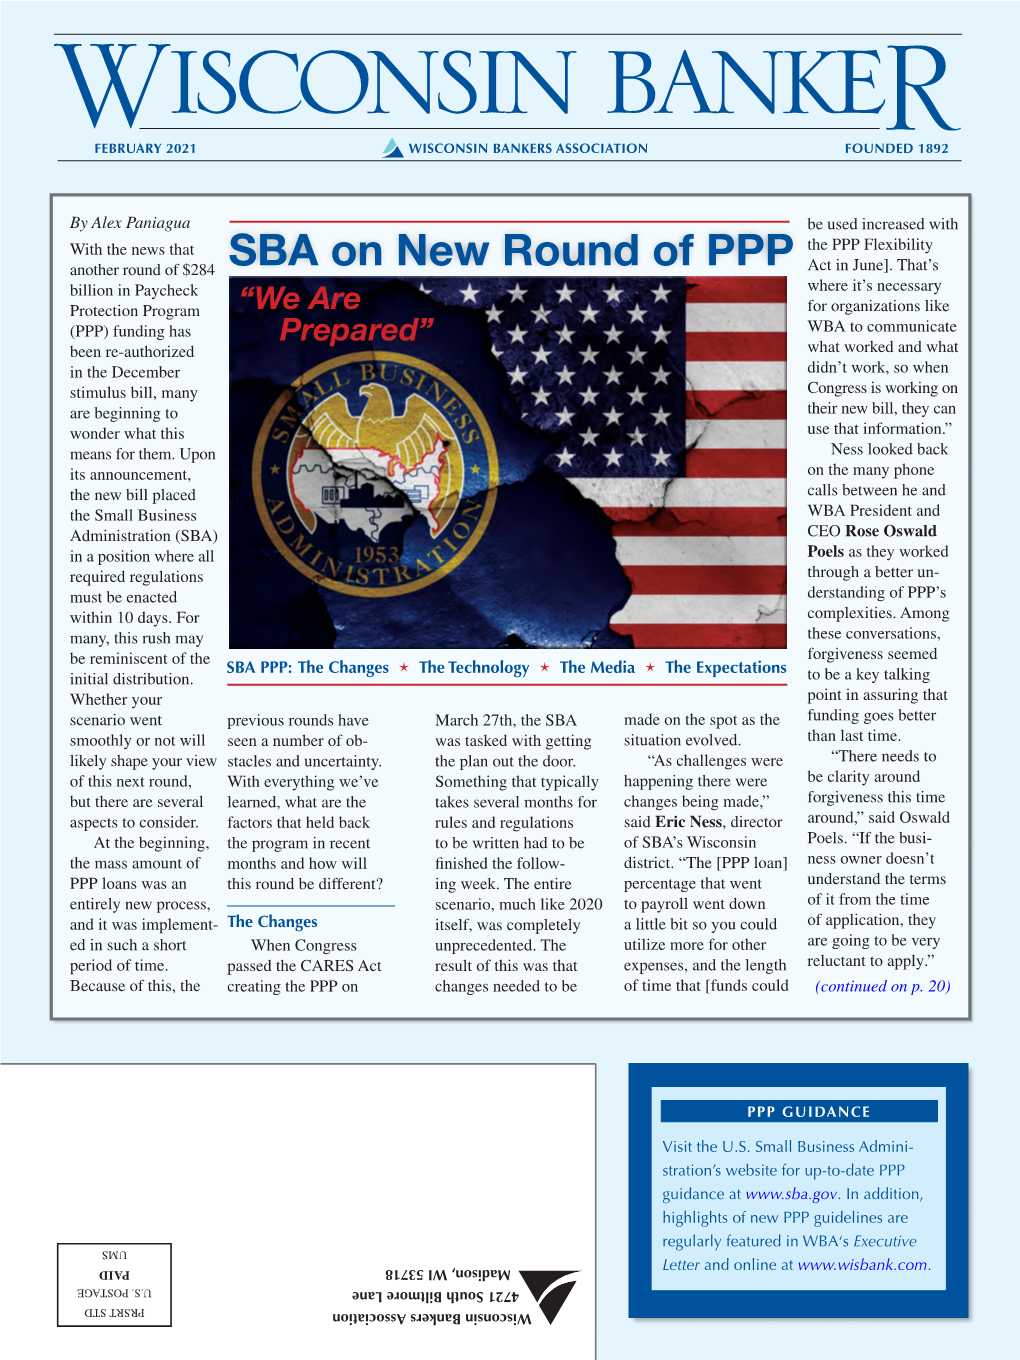 SBA on New Round of PPP Act in June]